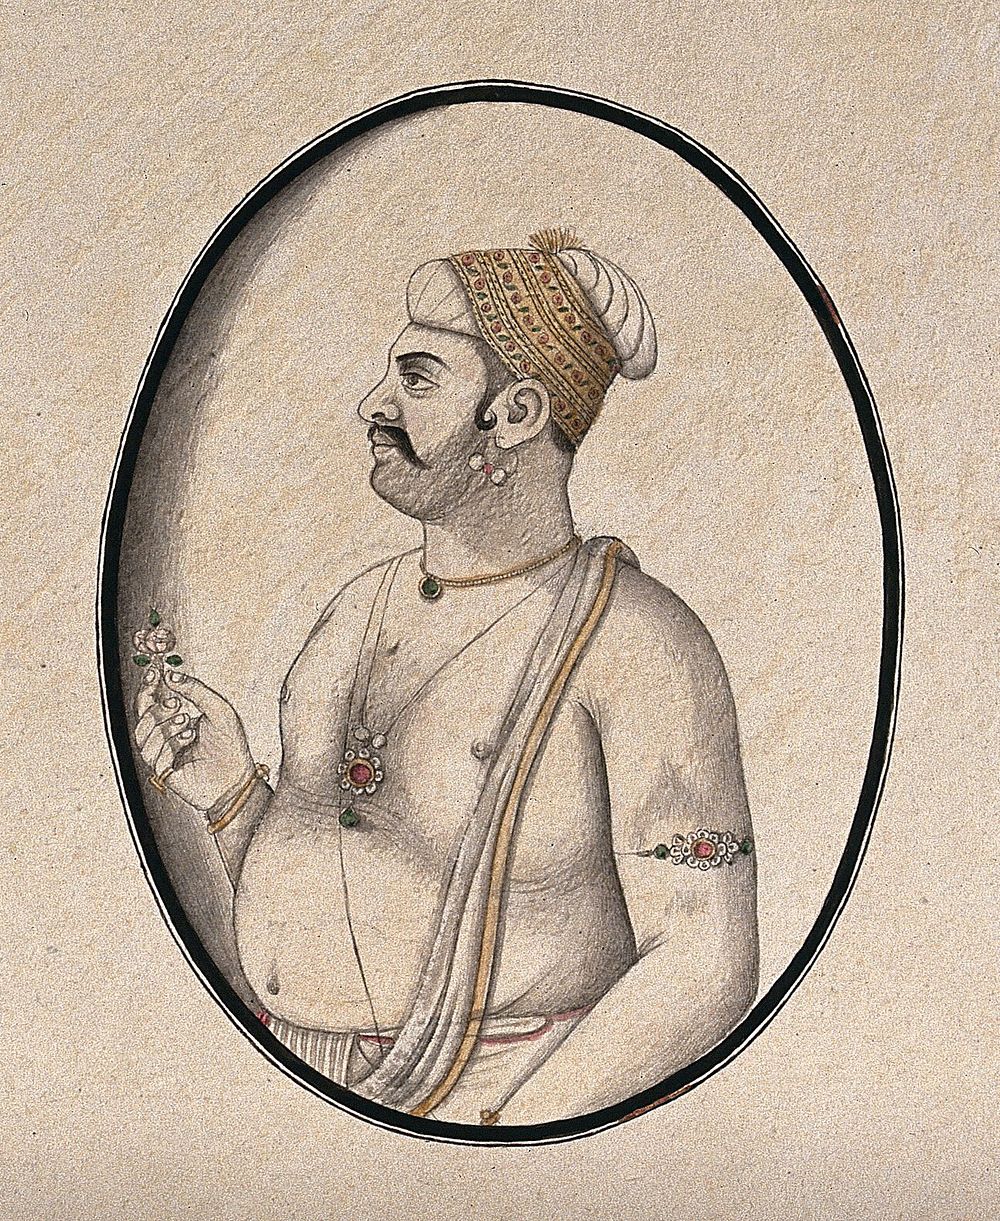 A bare chested man holding a flower. Watercolour drawing by an Indian artist.